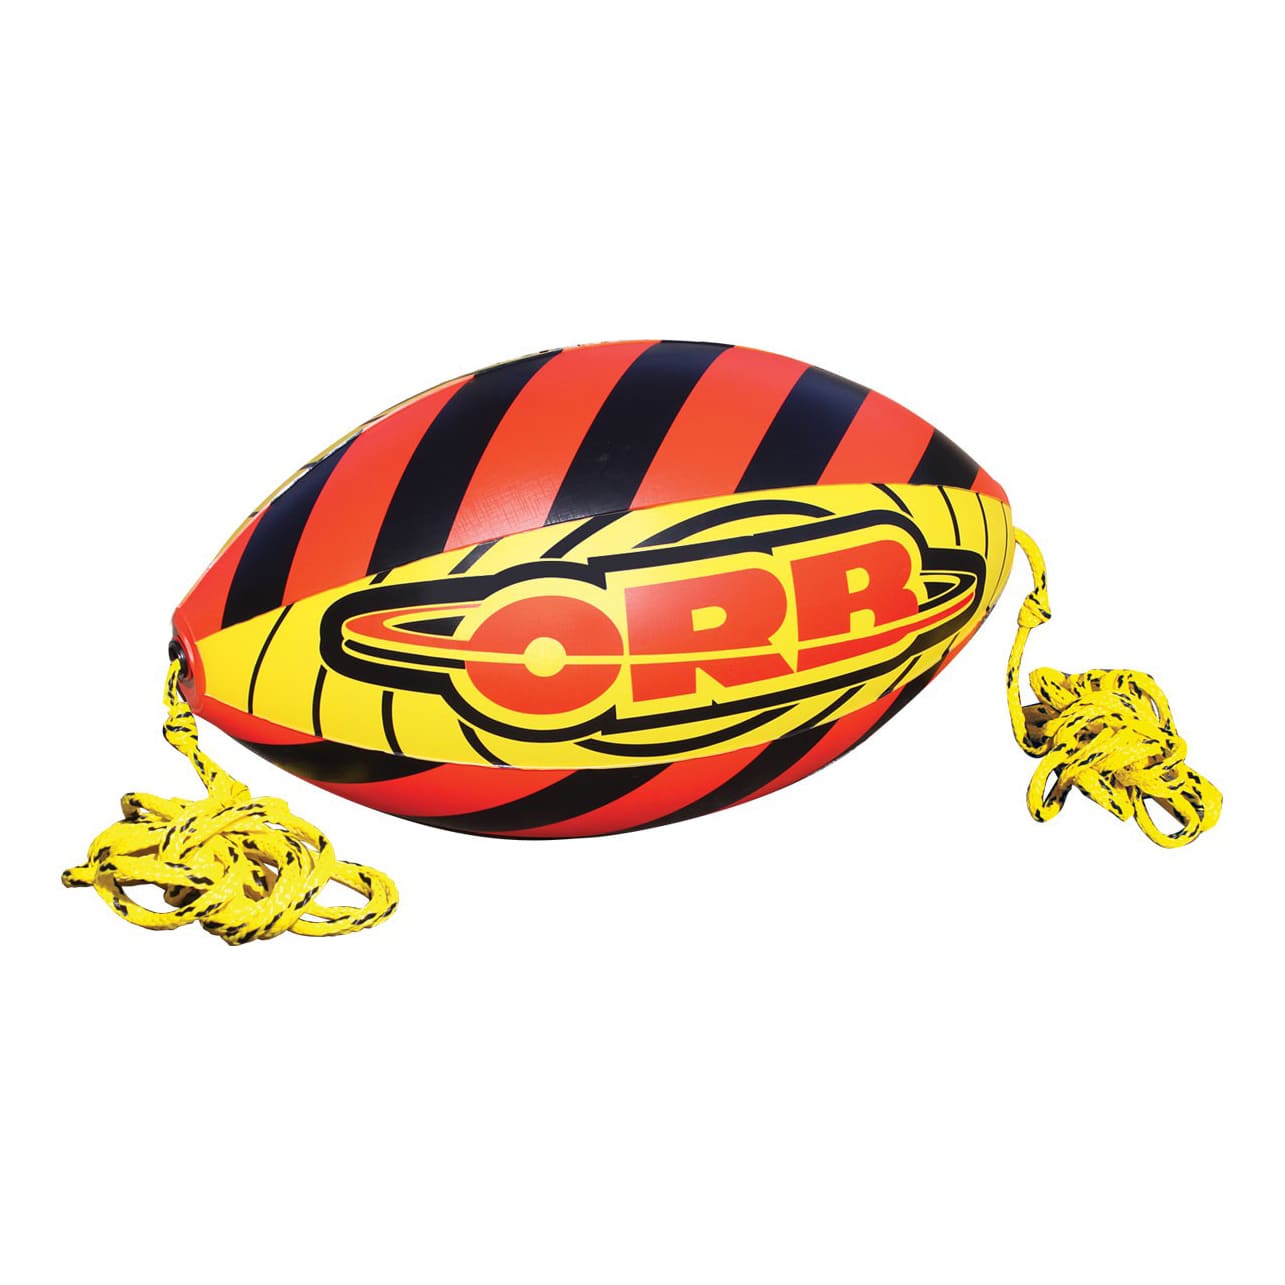 Airhead® Orb Tow Rope with Inflatable Buoy